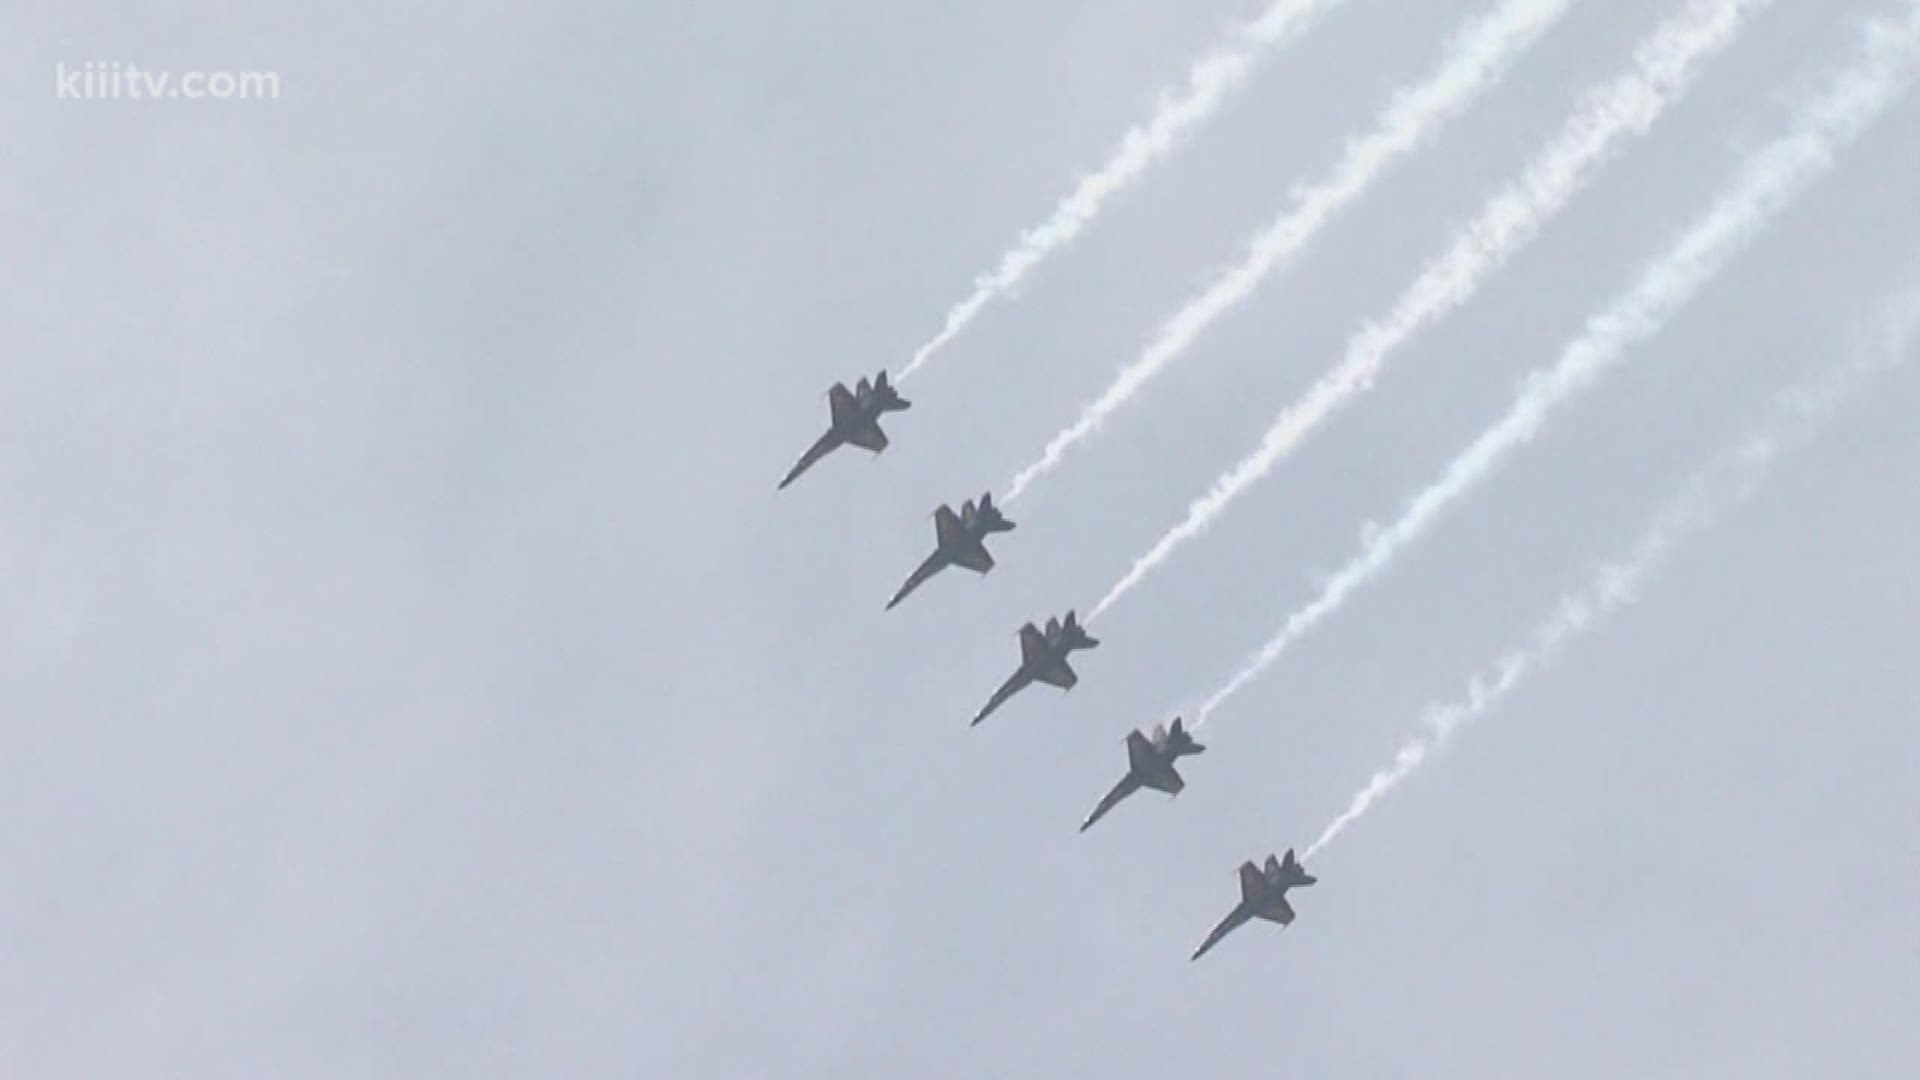 The U.S. Navy's Blue Angels will be making their return visit to the Coastal Bend on April 13-14 of next year.